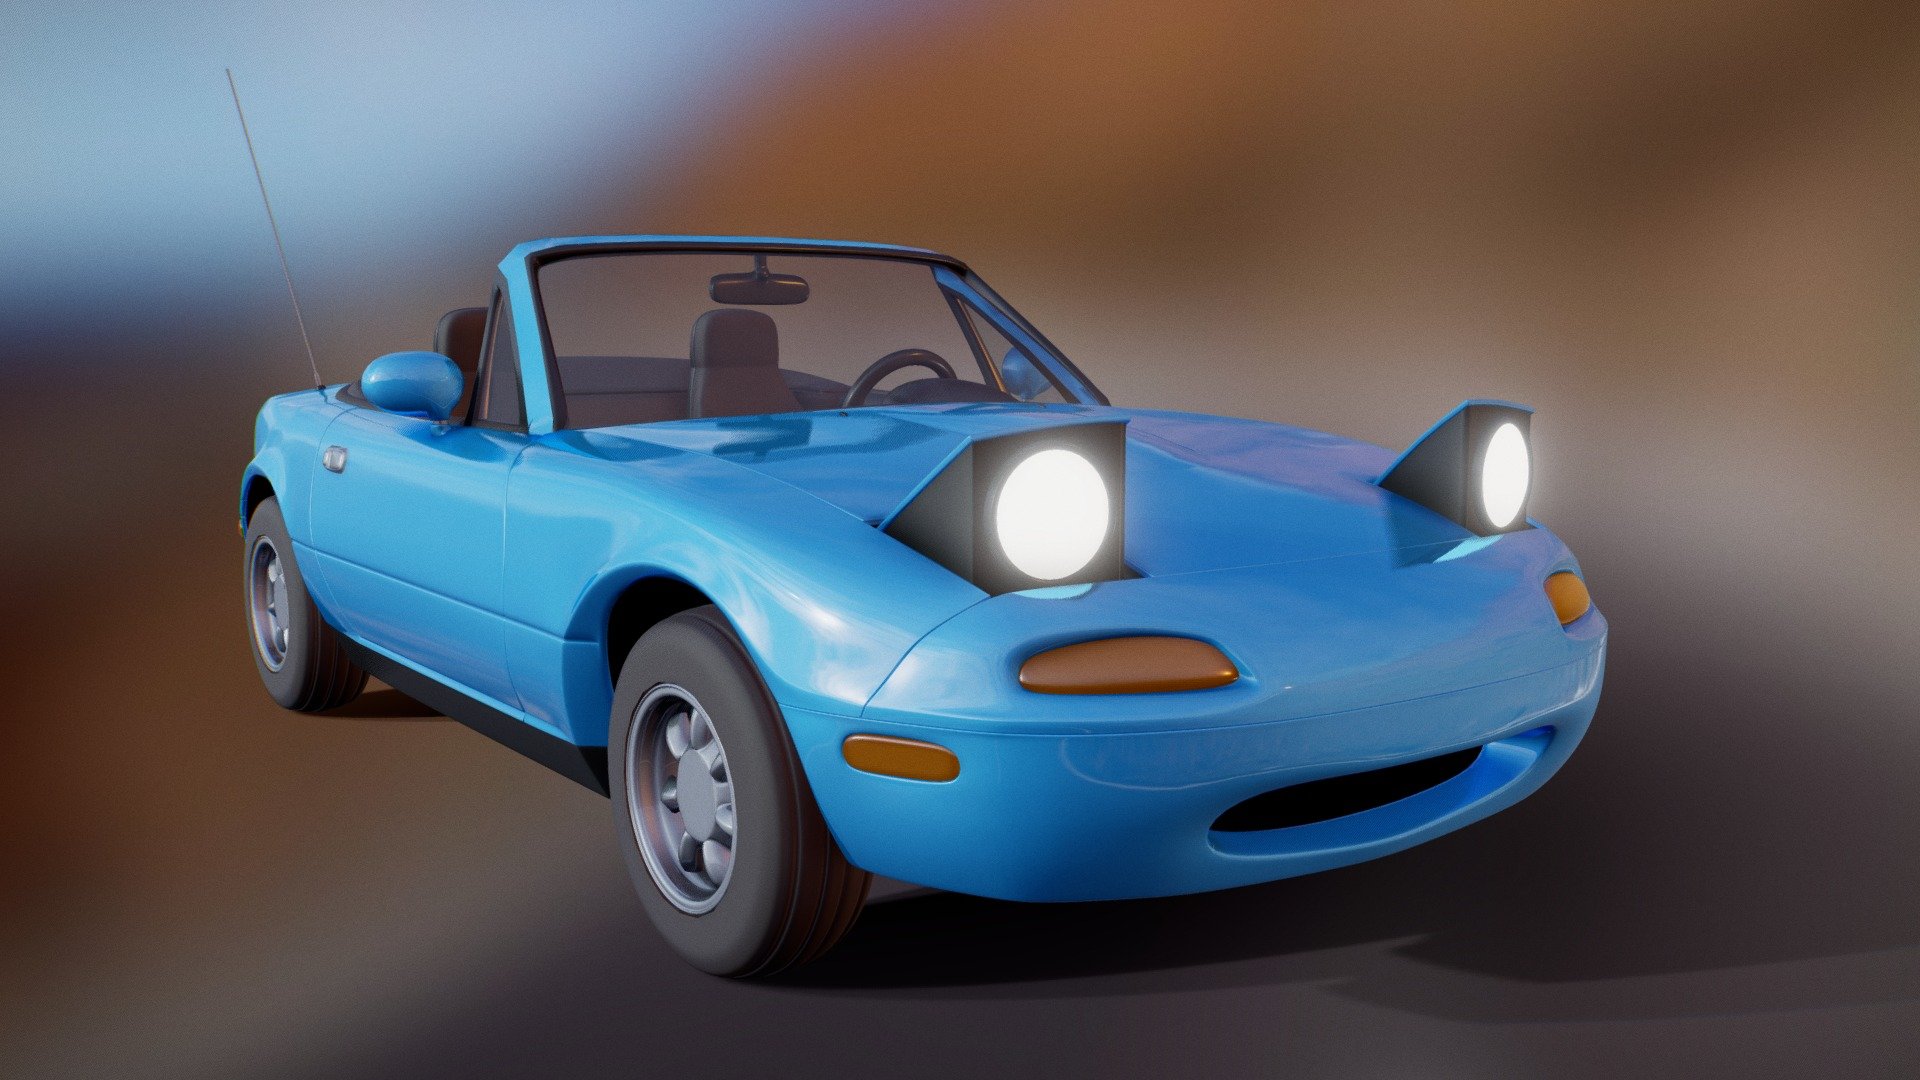 Modeled for my brother, who owns 2 white Miatas from the 90s - I found the blue version to be exceptionally cute, though, so I gave it that paint job. : ) 

  I  would like to eventually add the extras that he has on his 1990: mud flaps, headrest bars, decals, etc.

Work in Progress

needs UVs
needs textures
high-poly needs tweaks
want to add more attachments

Programs

Autodesk Maya 2018
Future plans to use Substance Painter for textures &amp; renders

Time

50+ hours across ~6 weeks

Triangle Count

Low-Poly before smoothing 2x: ~35k
Final goal is under 600k for full high-poly + attachments
 - 1990 Mazda Miata MX-5 NA (High-Poly) - 3D model by abigaia 3d model